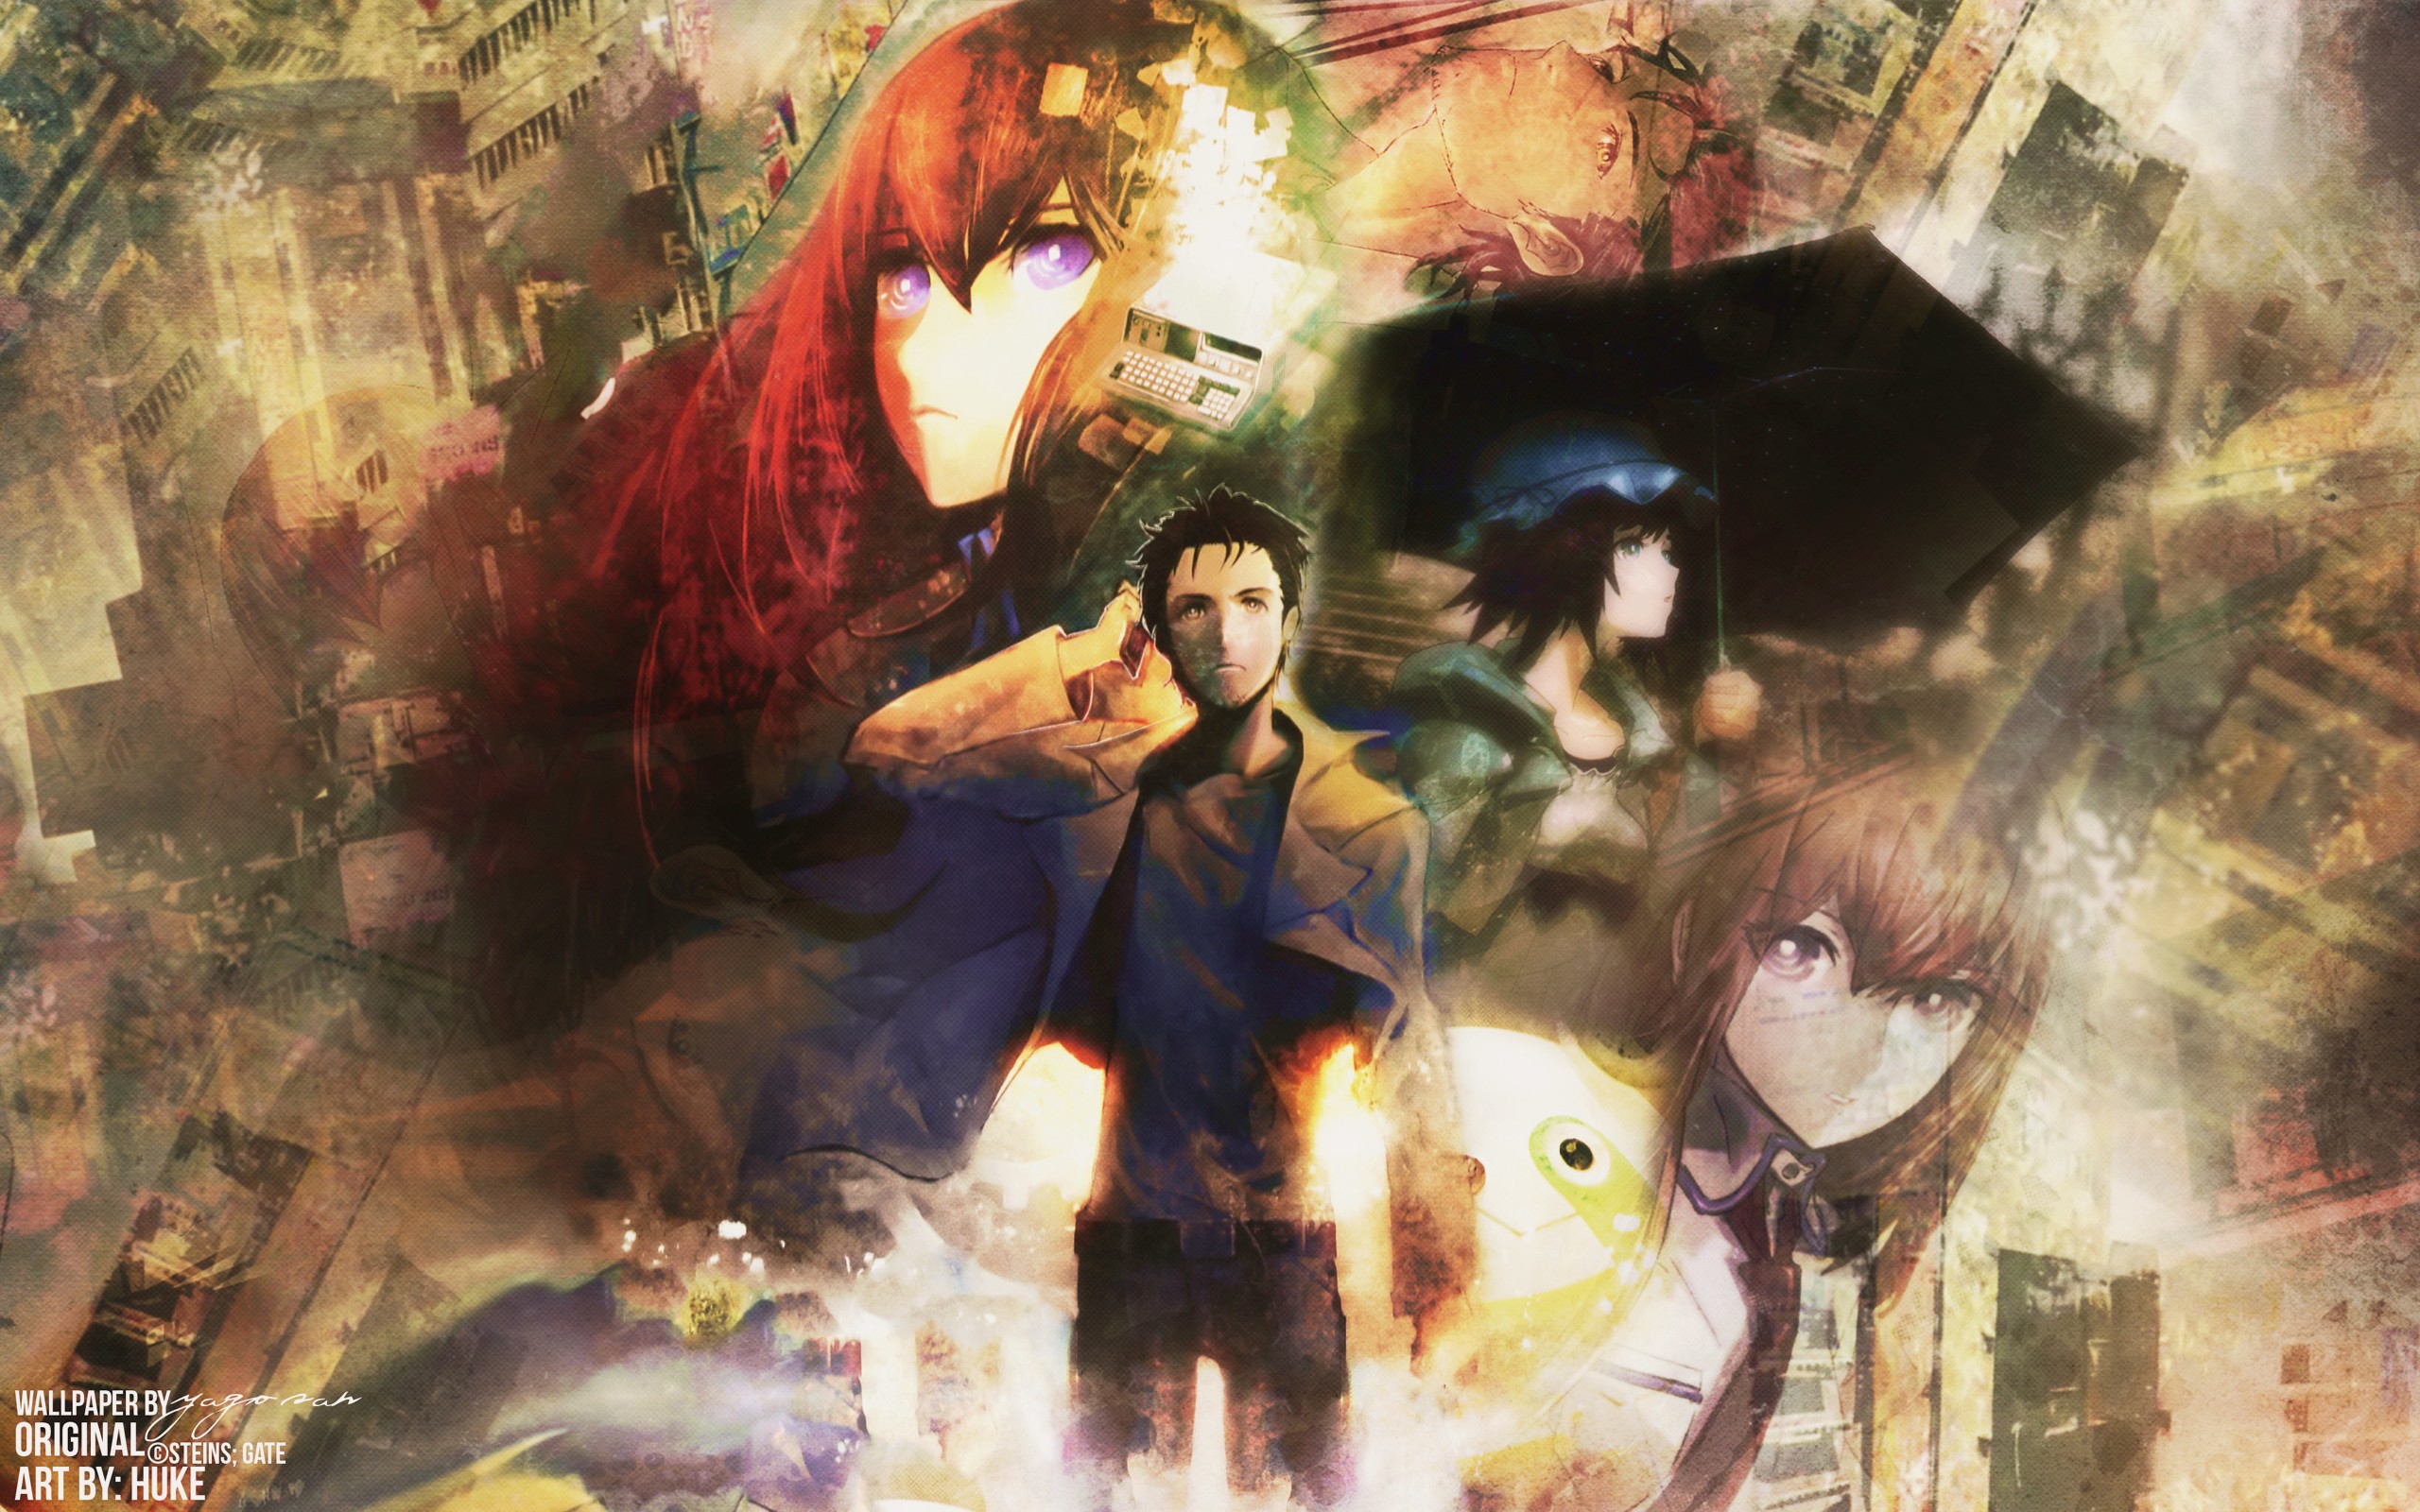 1440x2960 Steins Gate 0 Rintarou Okabe Kurisu Makise Samsung Galaxy Note 9 8 S9 S8 S8 Qhd Wallpaper Hd Games 4k Wallpapers Images Photos And Background Wallpapers Den